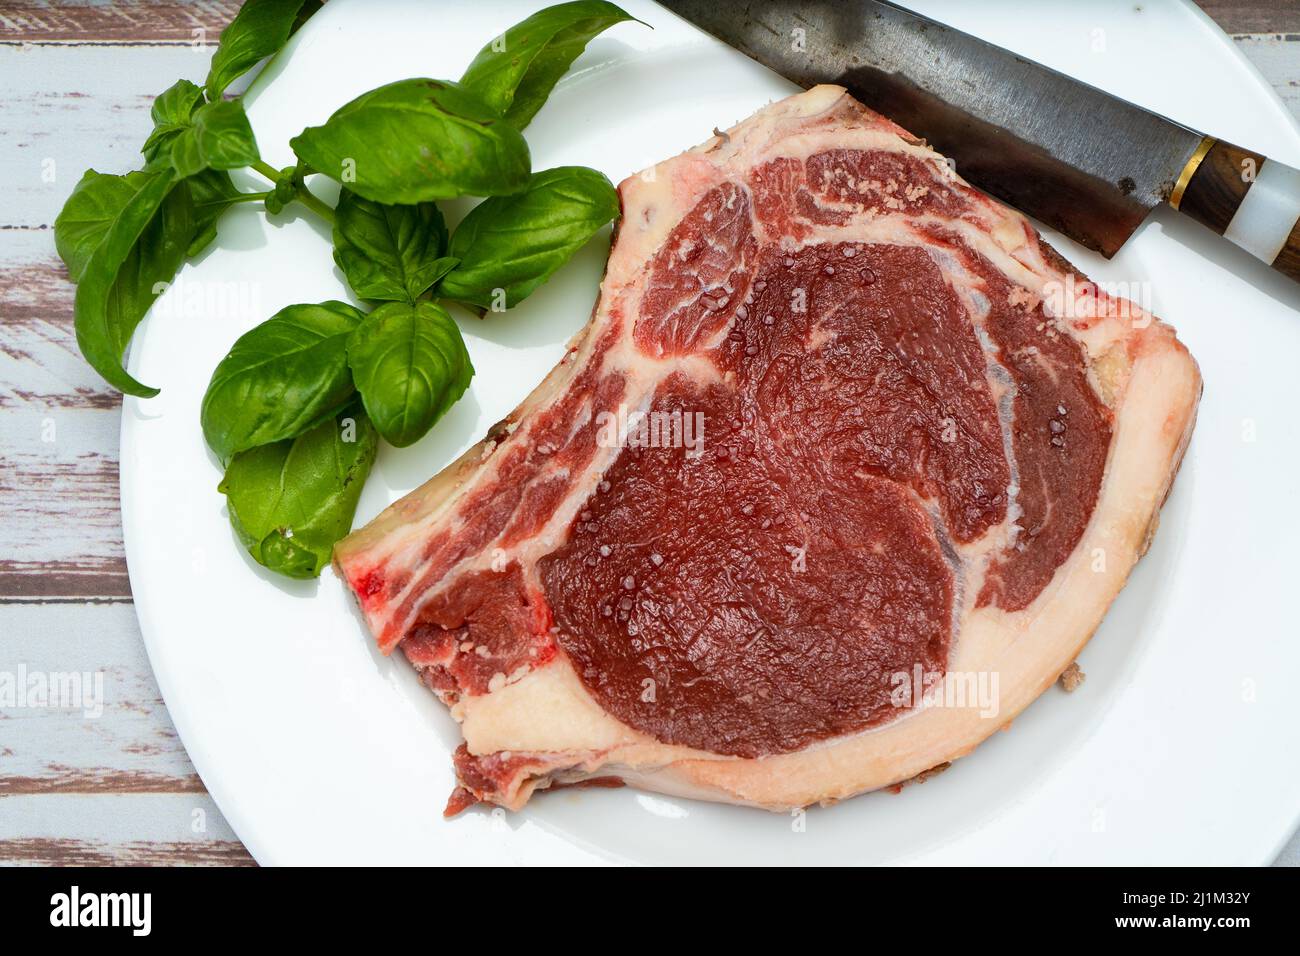 A bone-in steak or t-bone steak or porterhouse raw on a white plate on a wooden table with some green leaves. Top view. Horizontal orientation. Close- Stock Photo